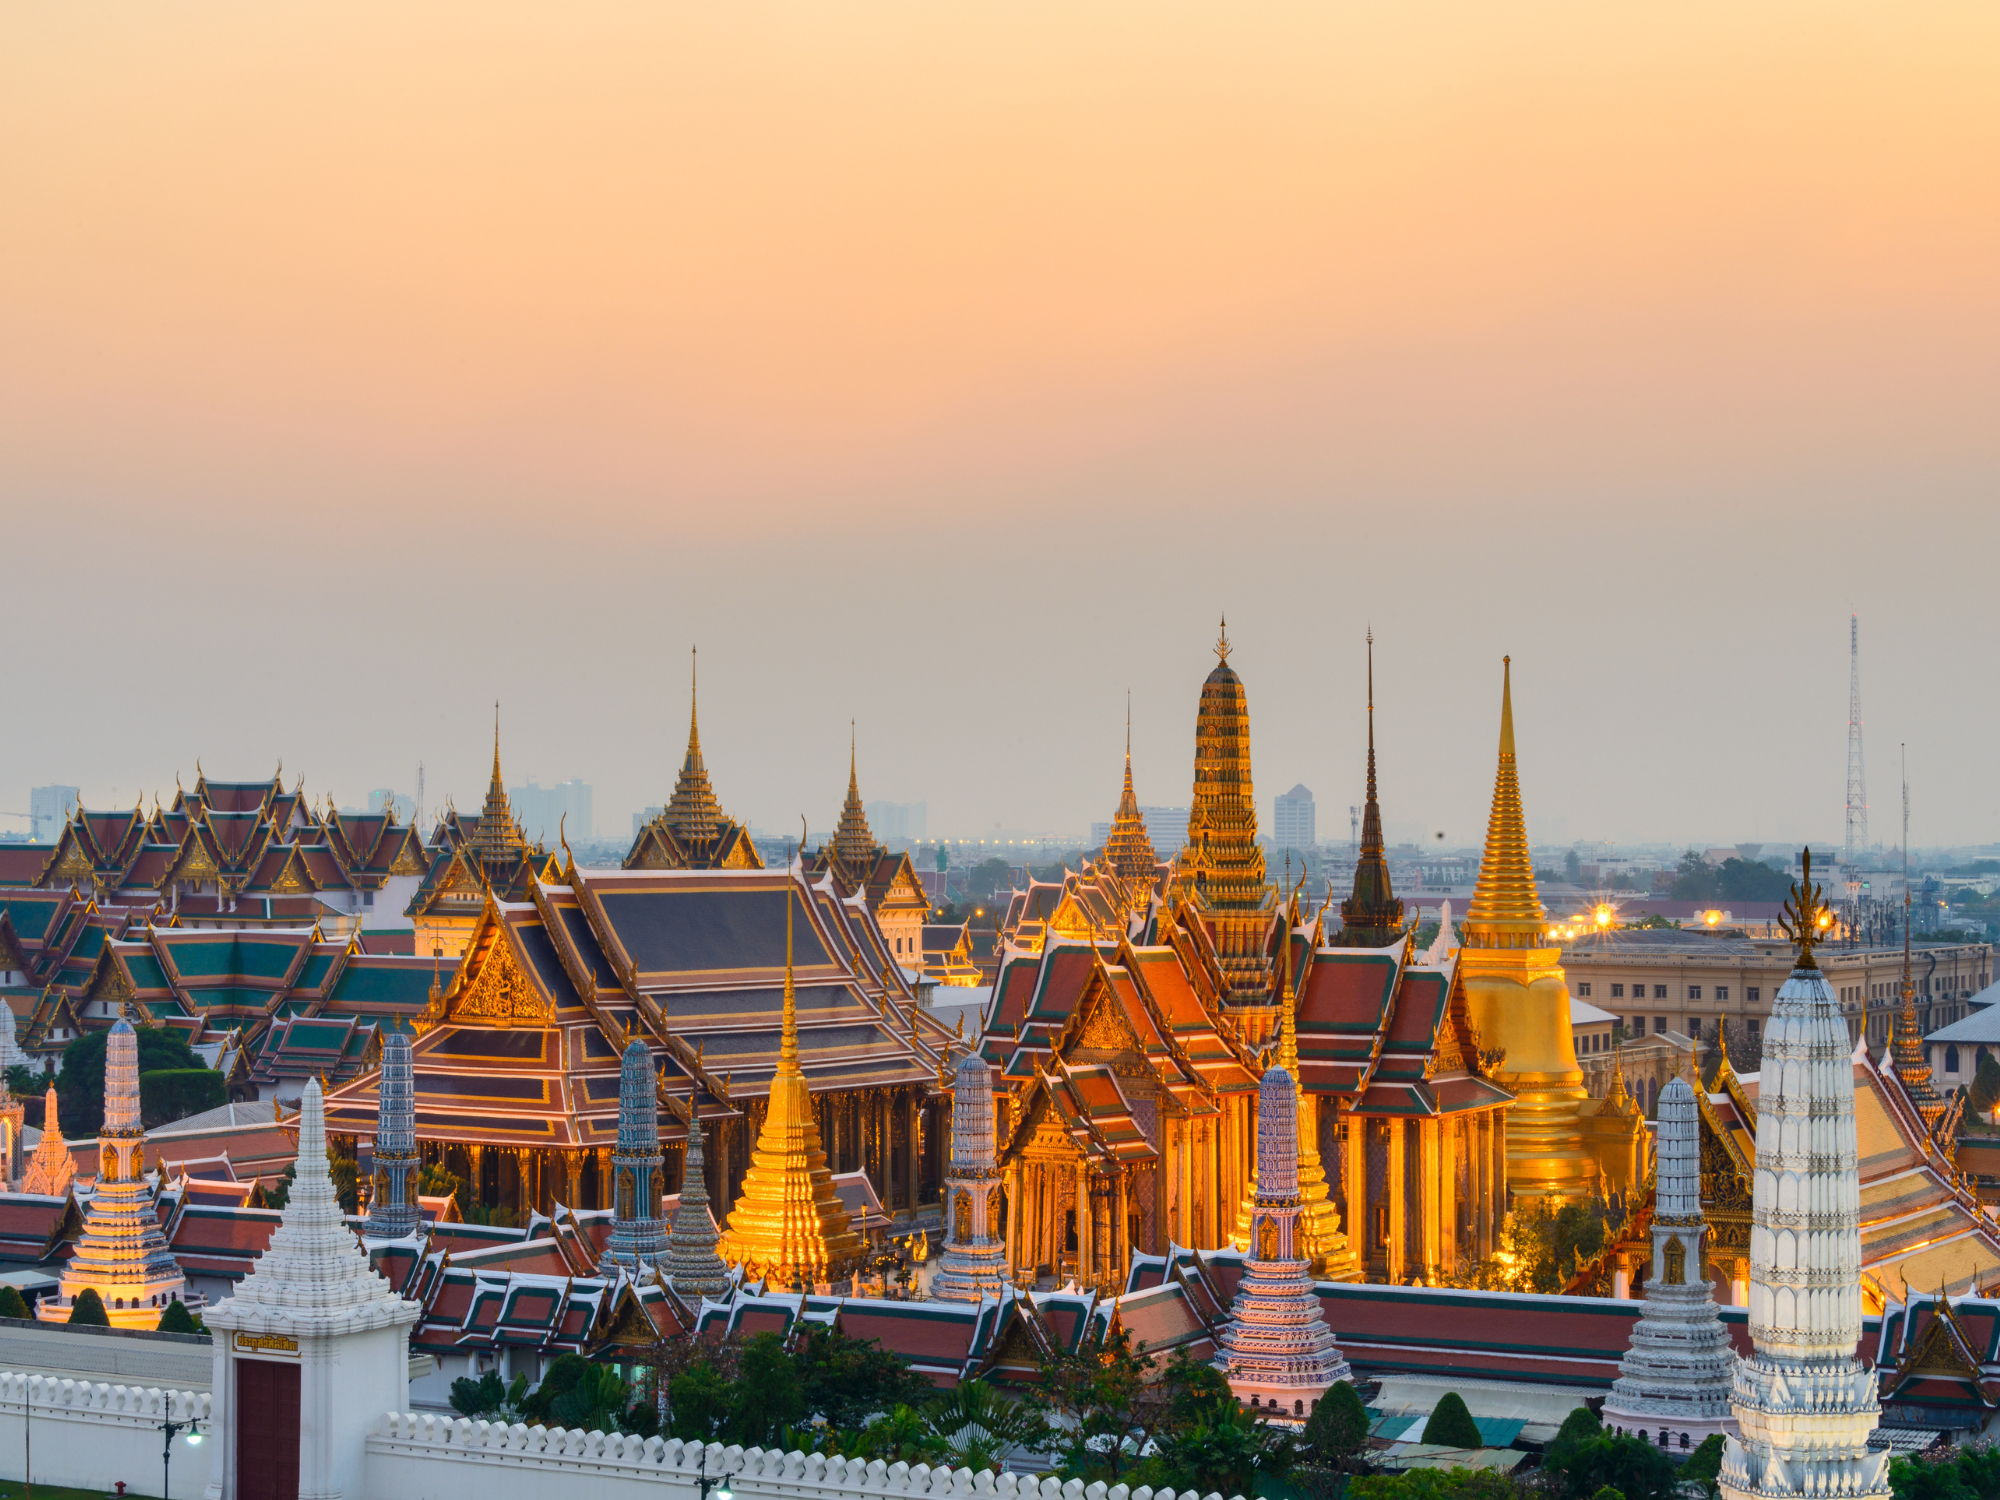 Things to do during your trip to thailand from uae - visit the grand palace in Bangkok